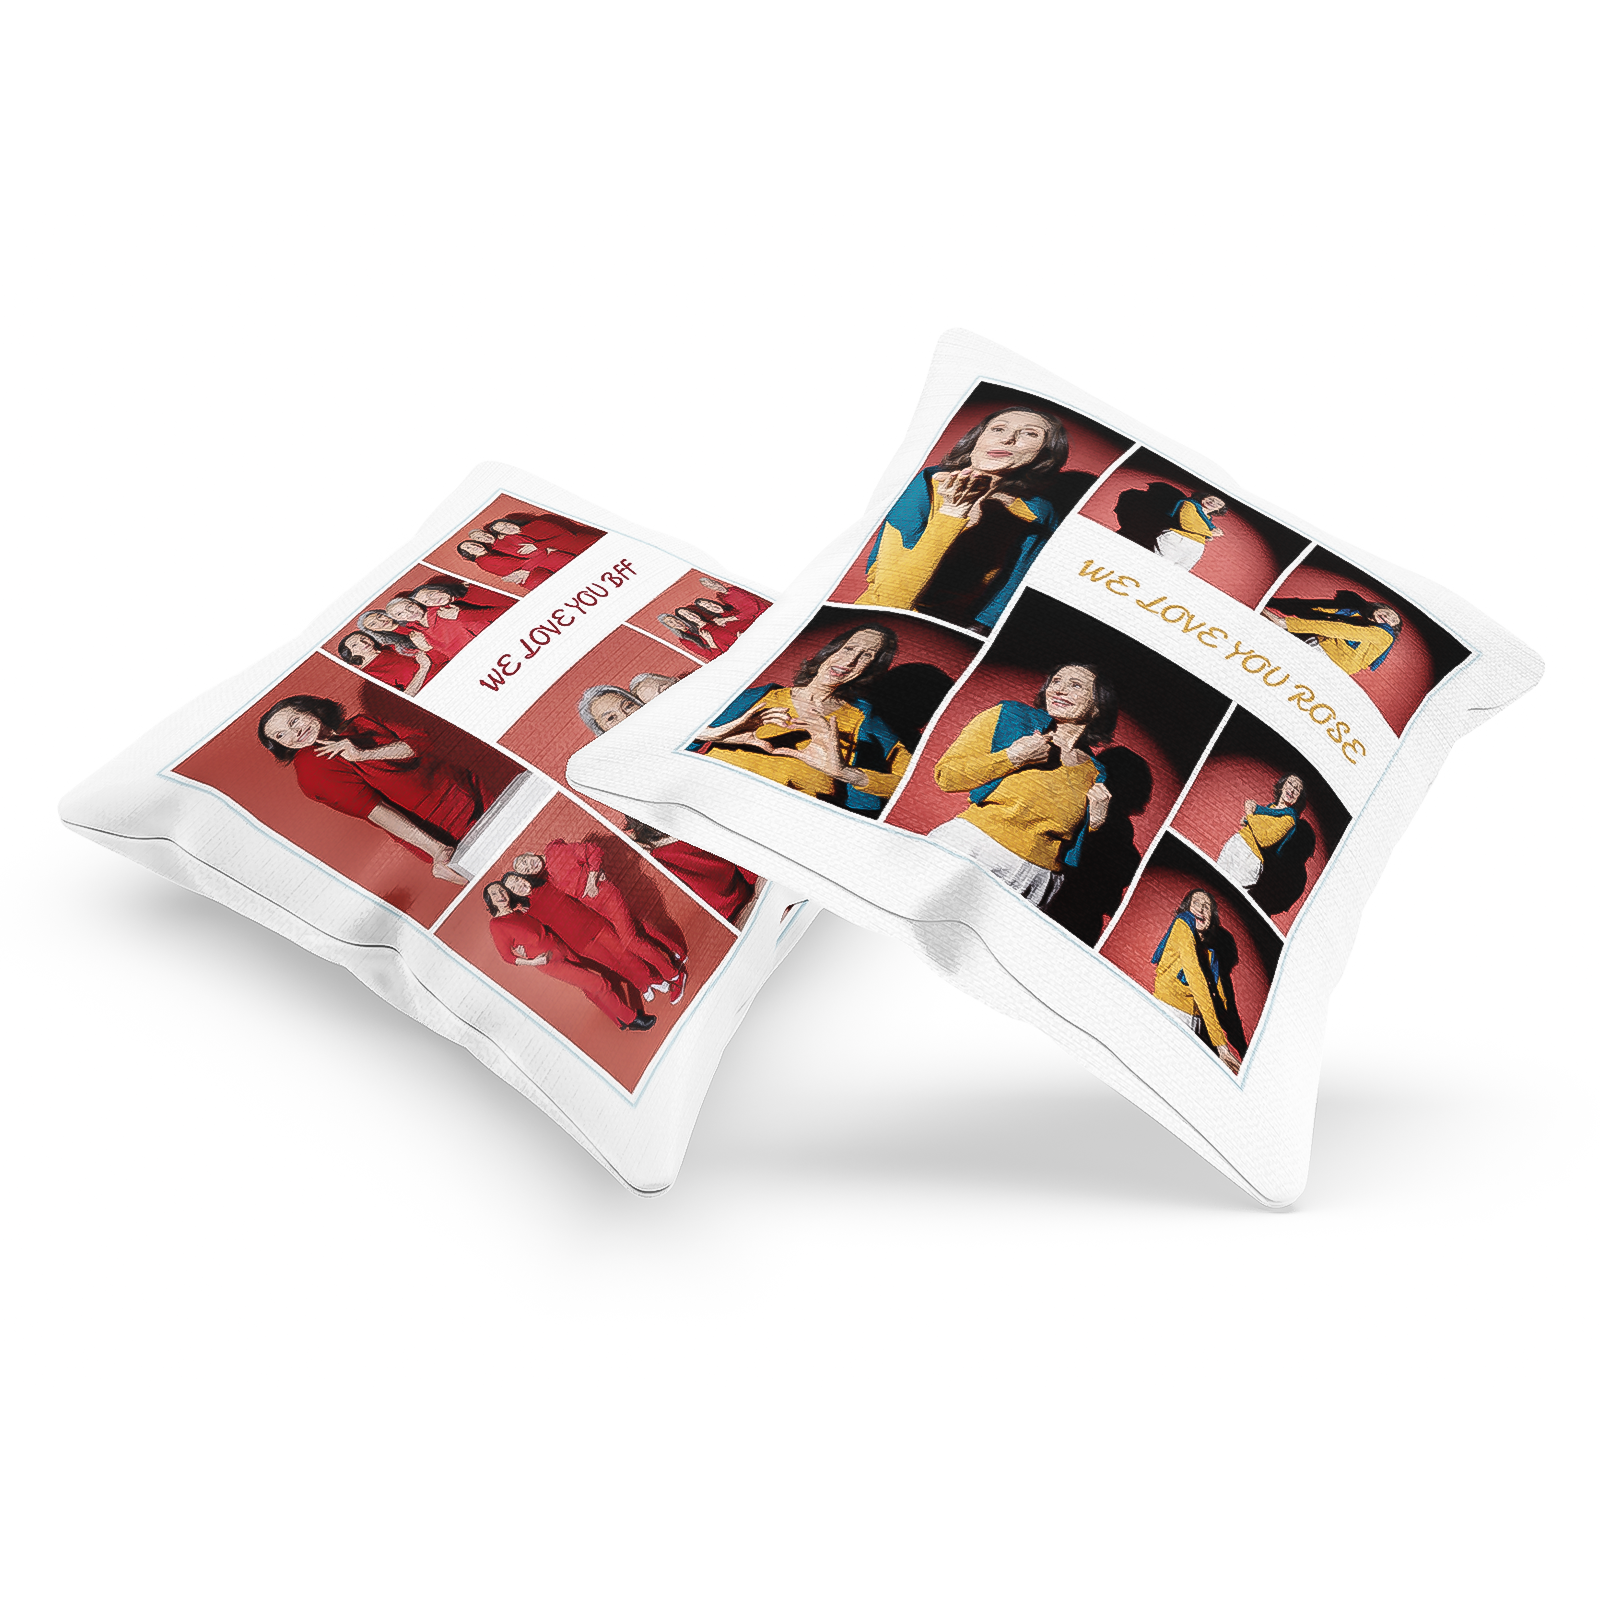 We Love Collage Photo Pillow